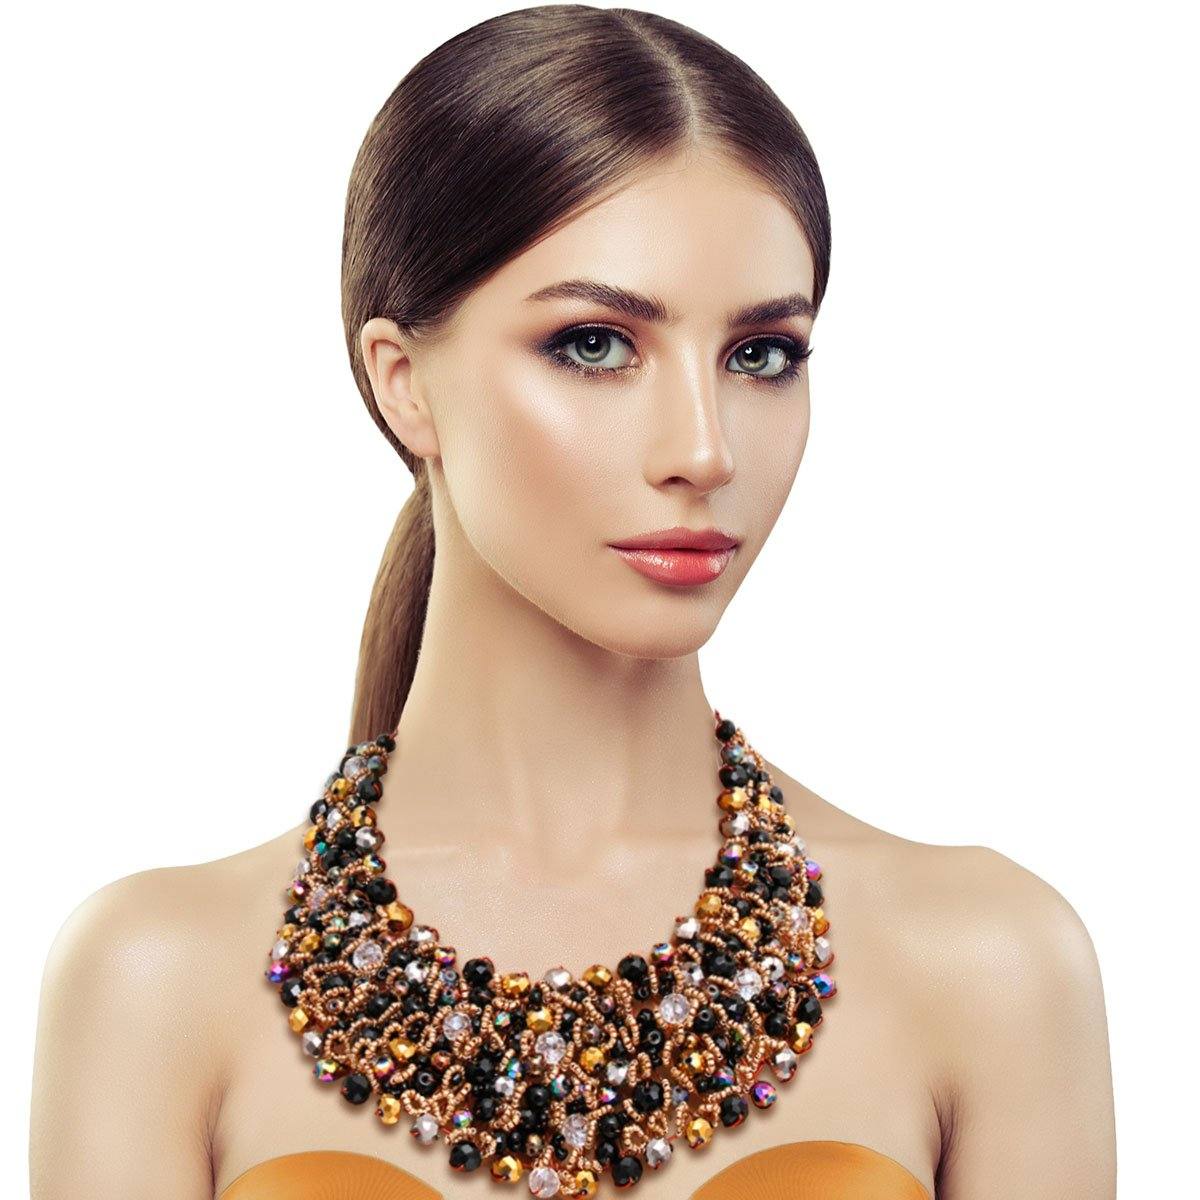 Crystal Bead and Copper Bib Necklace